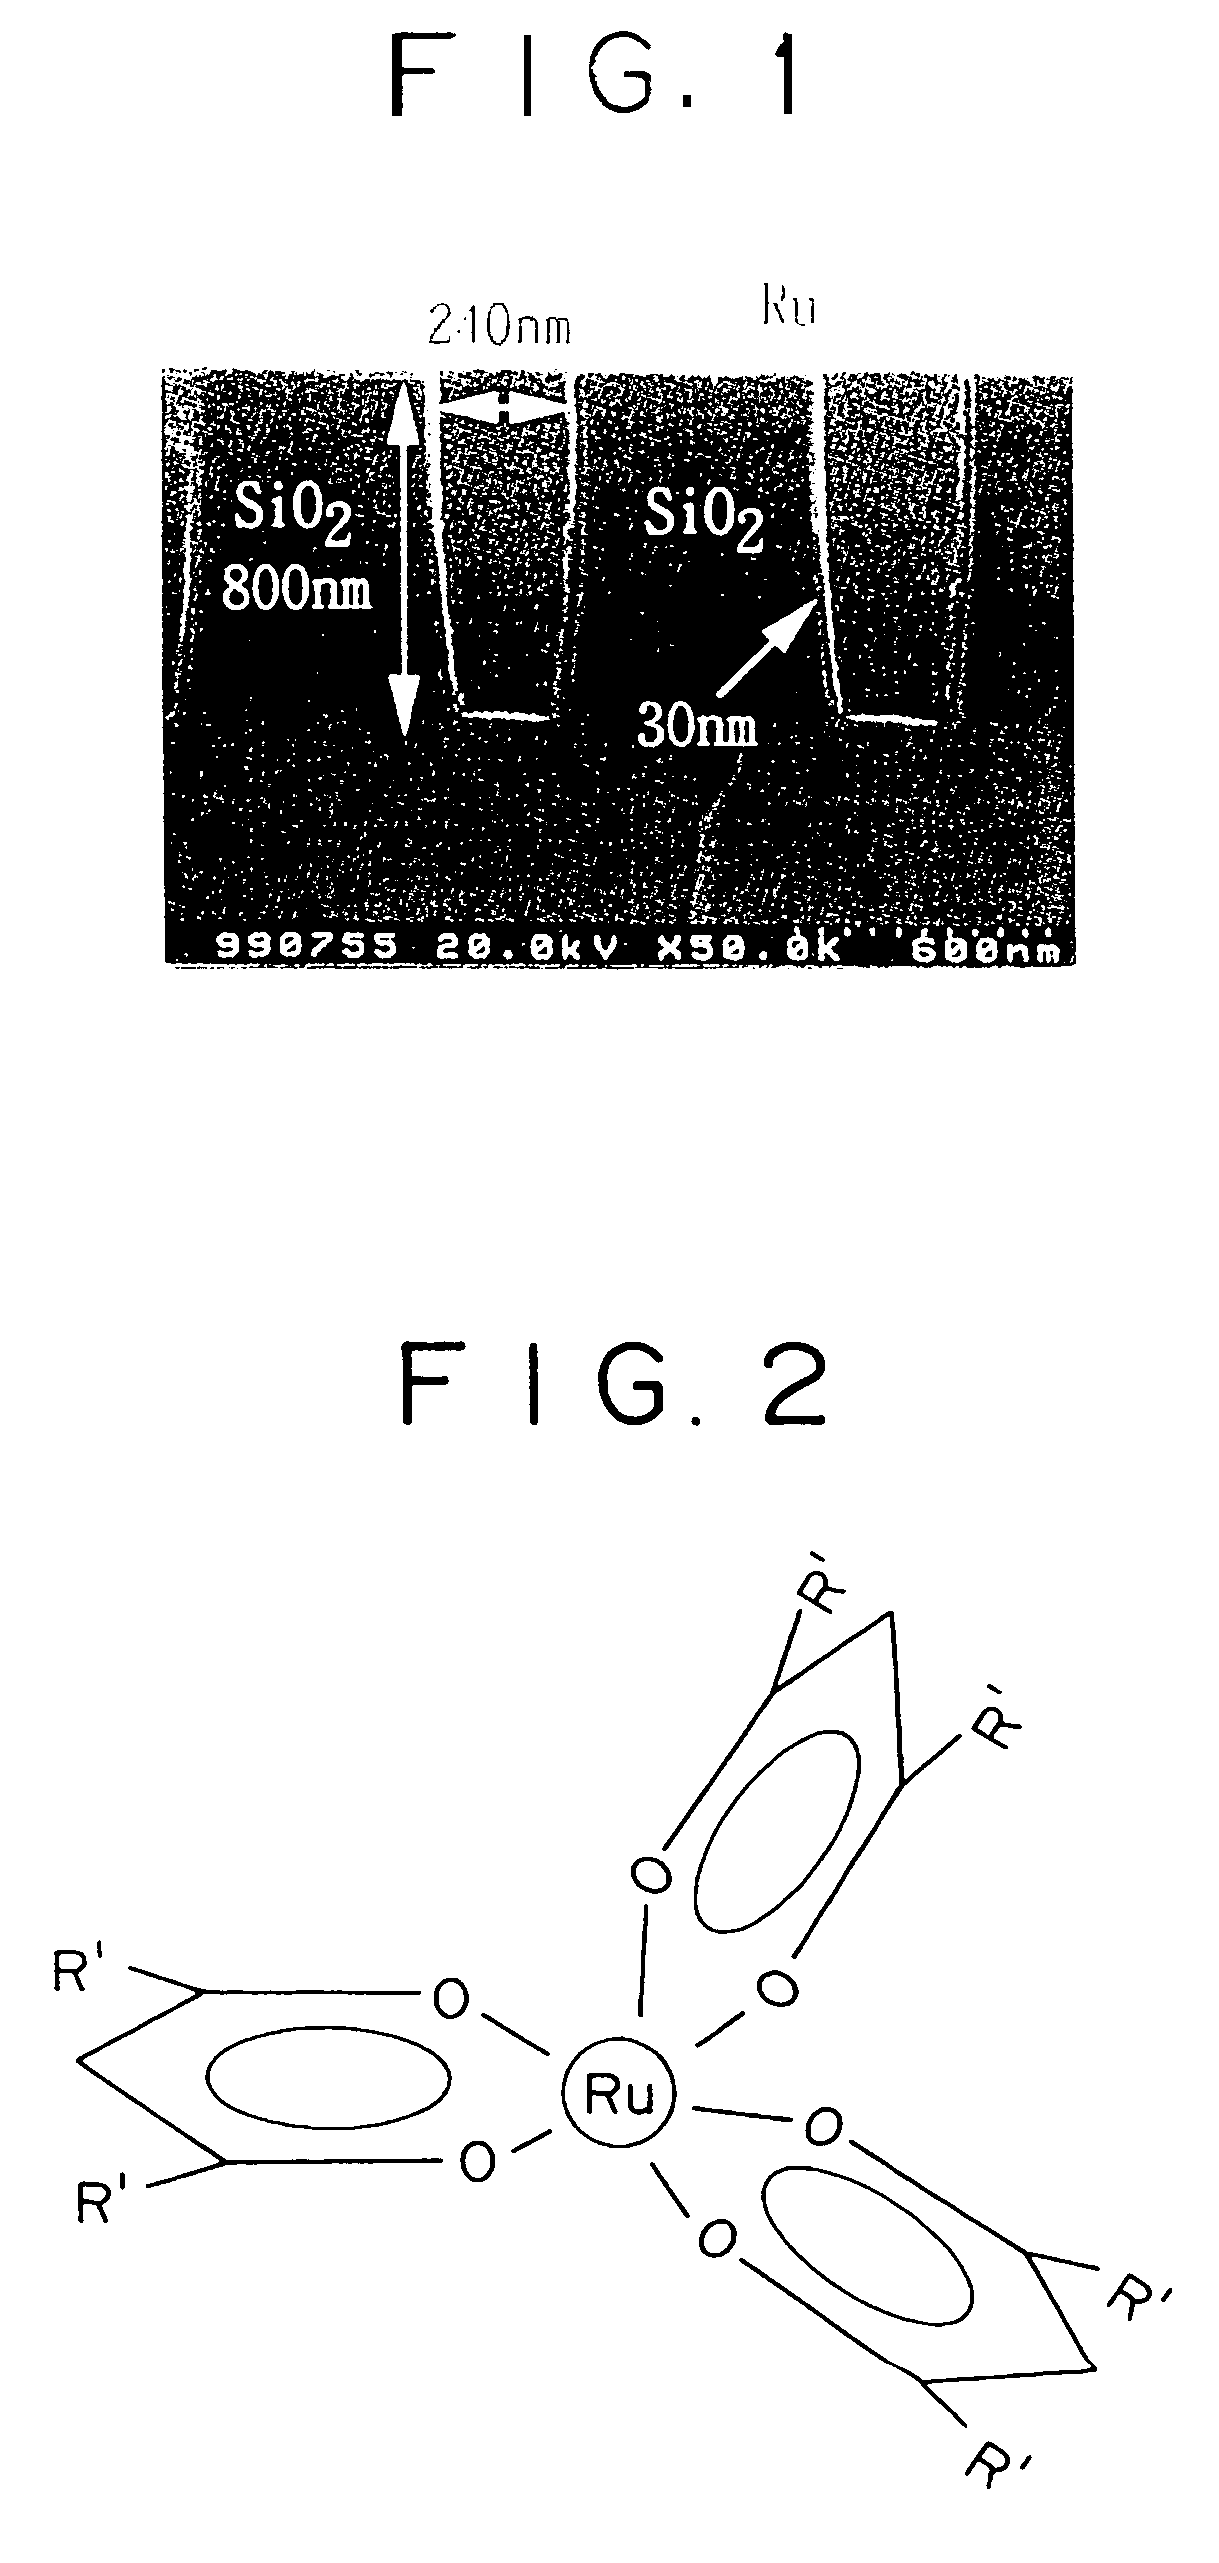 Method of forming capacitor with ruthenium top and bottom electrodes by MOCVD